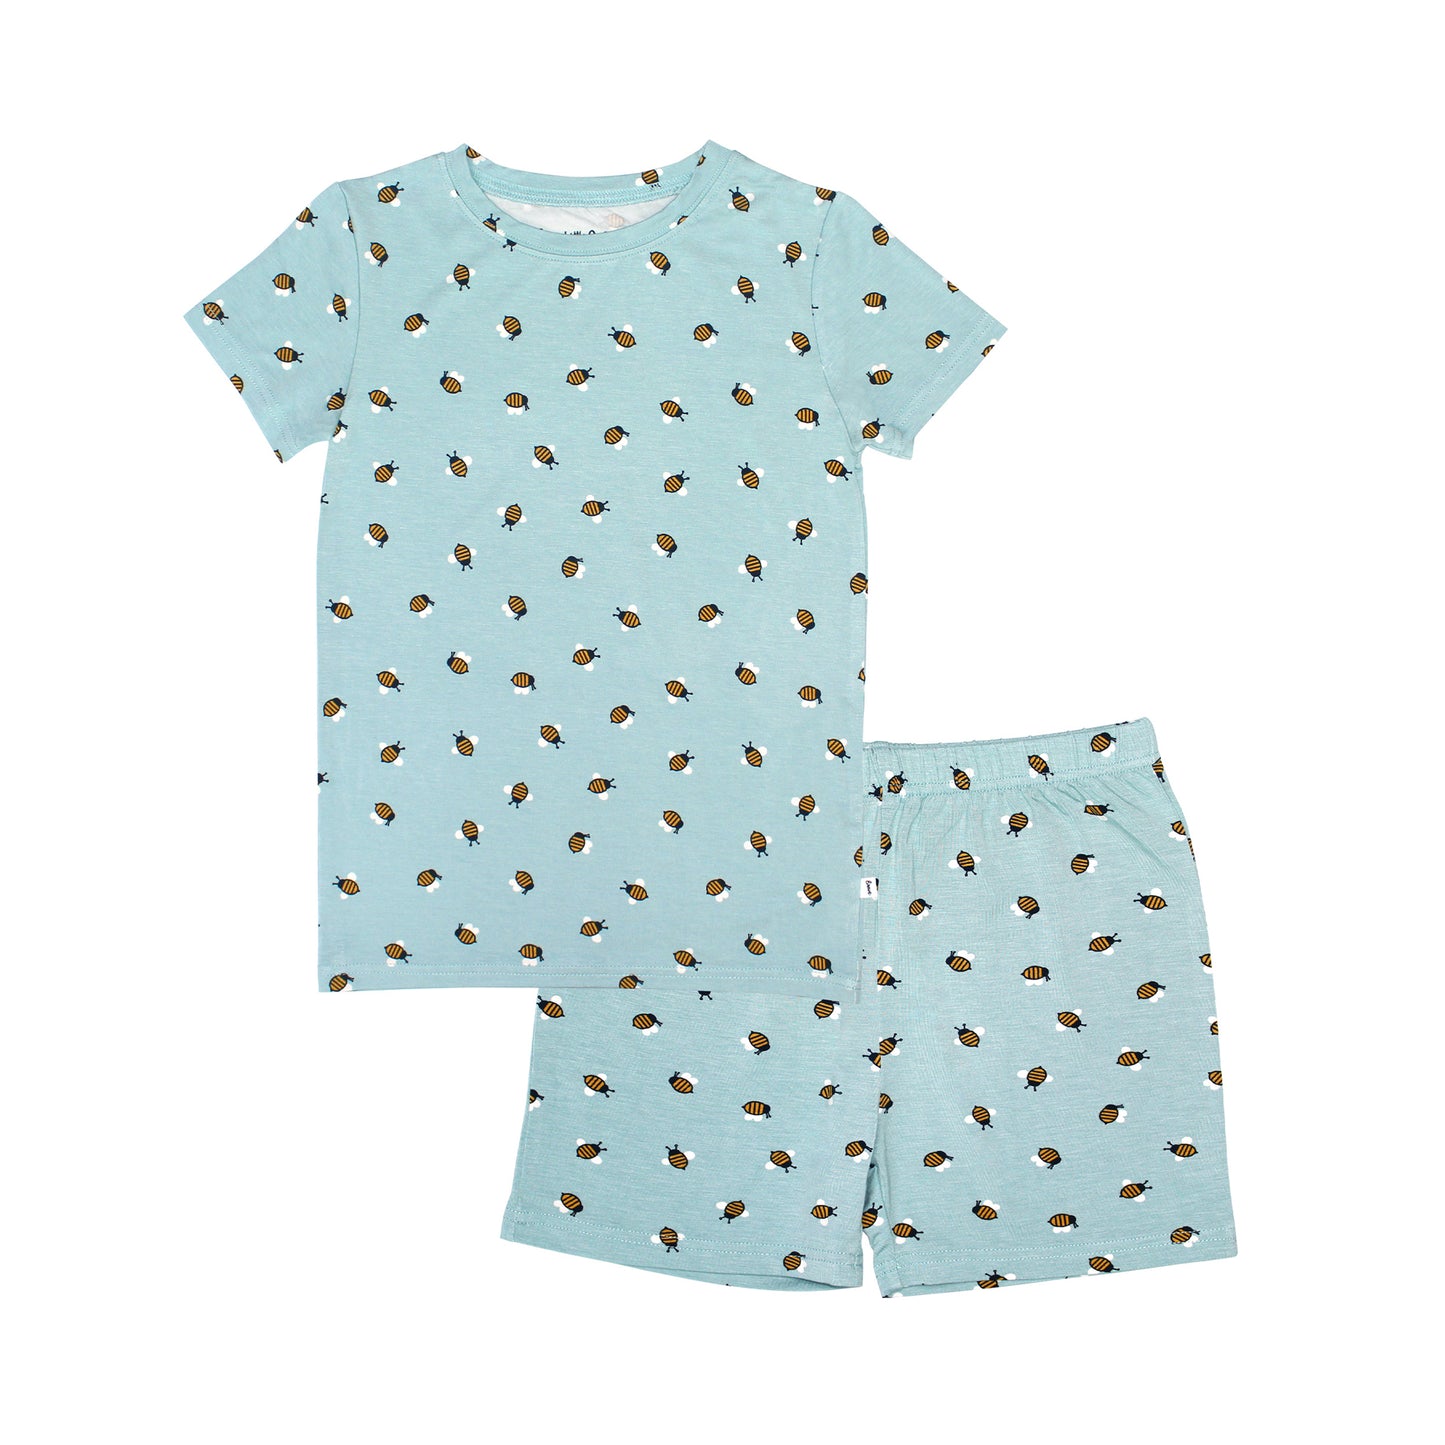 Blue Bees Shorts Two-Piece Set